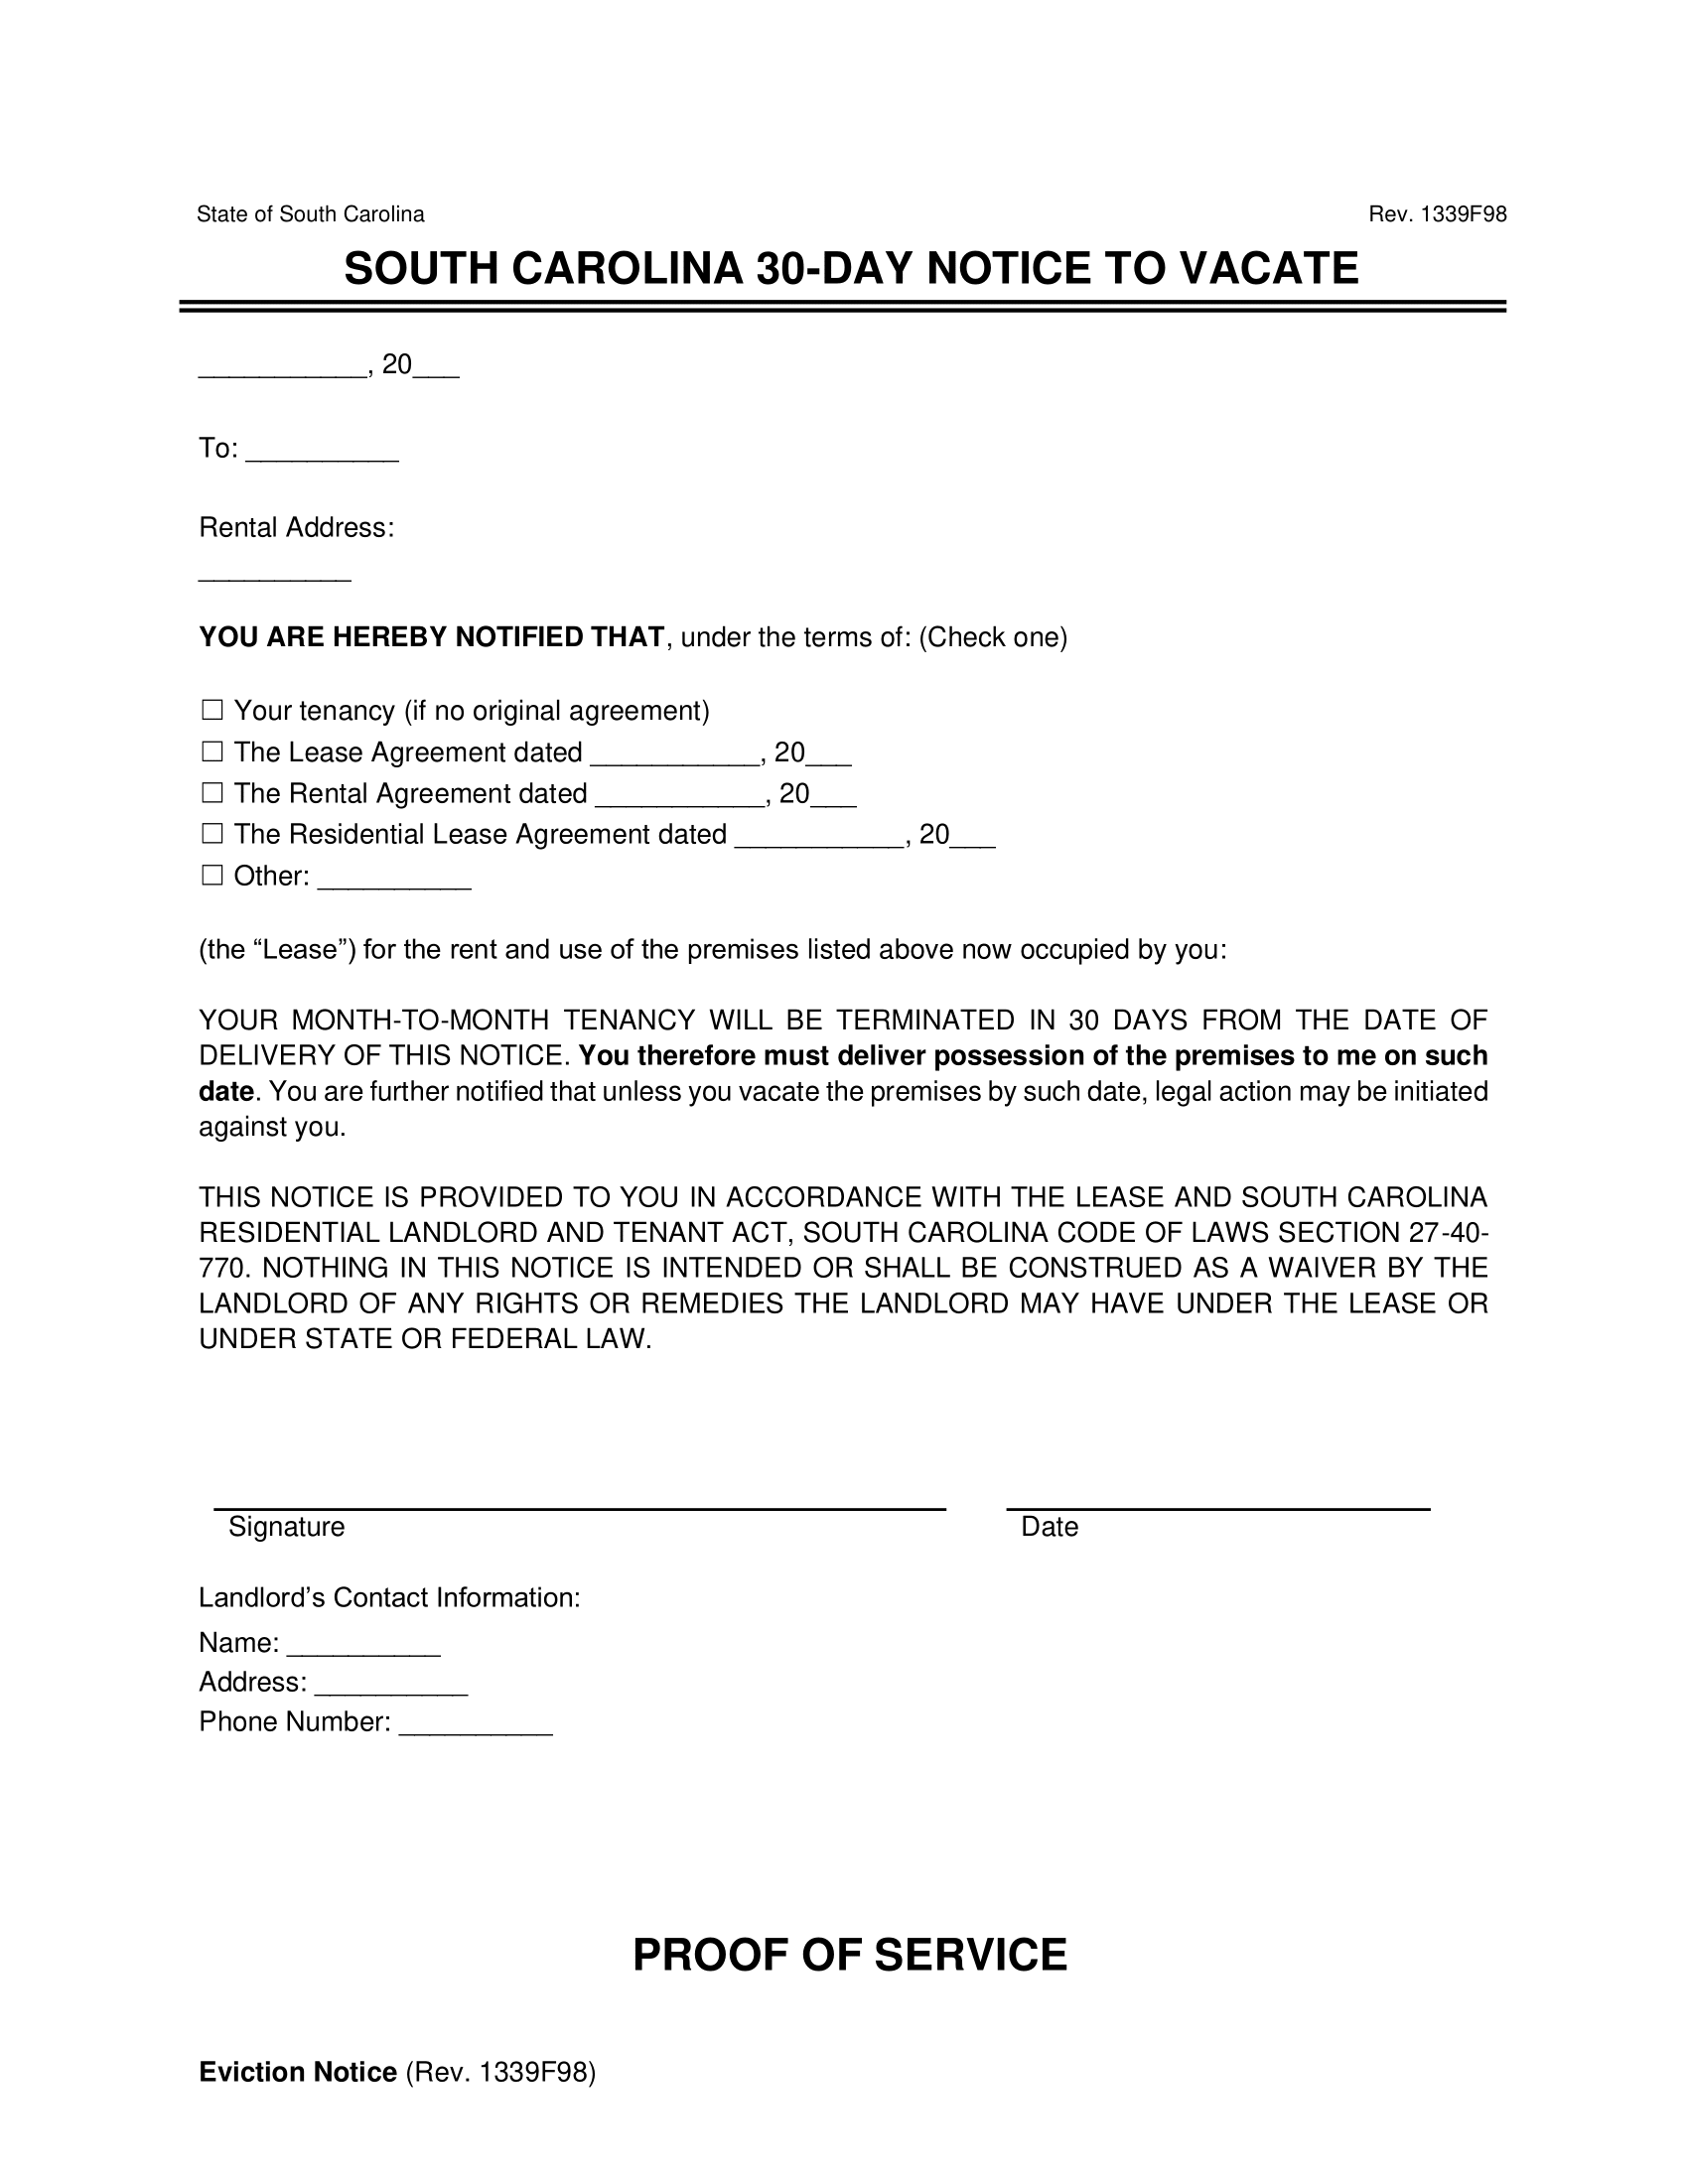 South Carolina 30-Day Notice to Vacate (Month to Month)